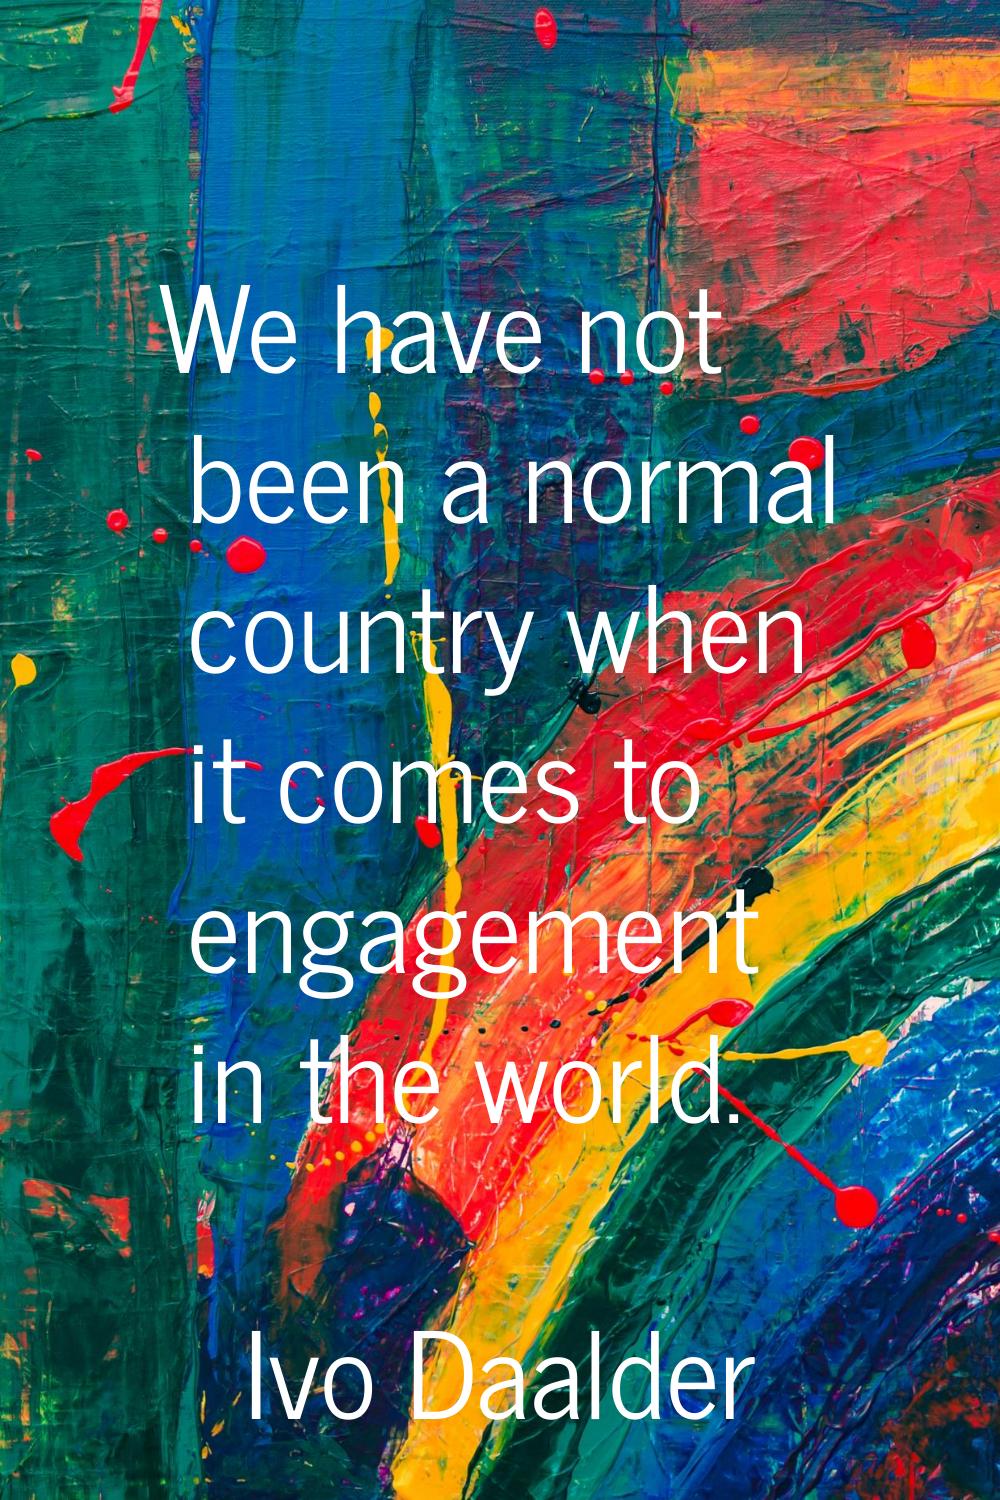 We have not been a normal country when it comes to engagement in the world.